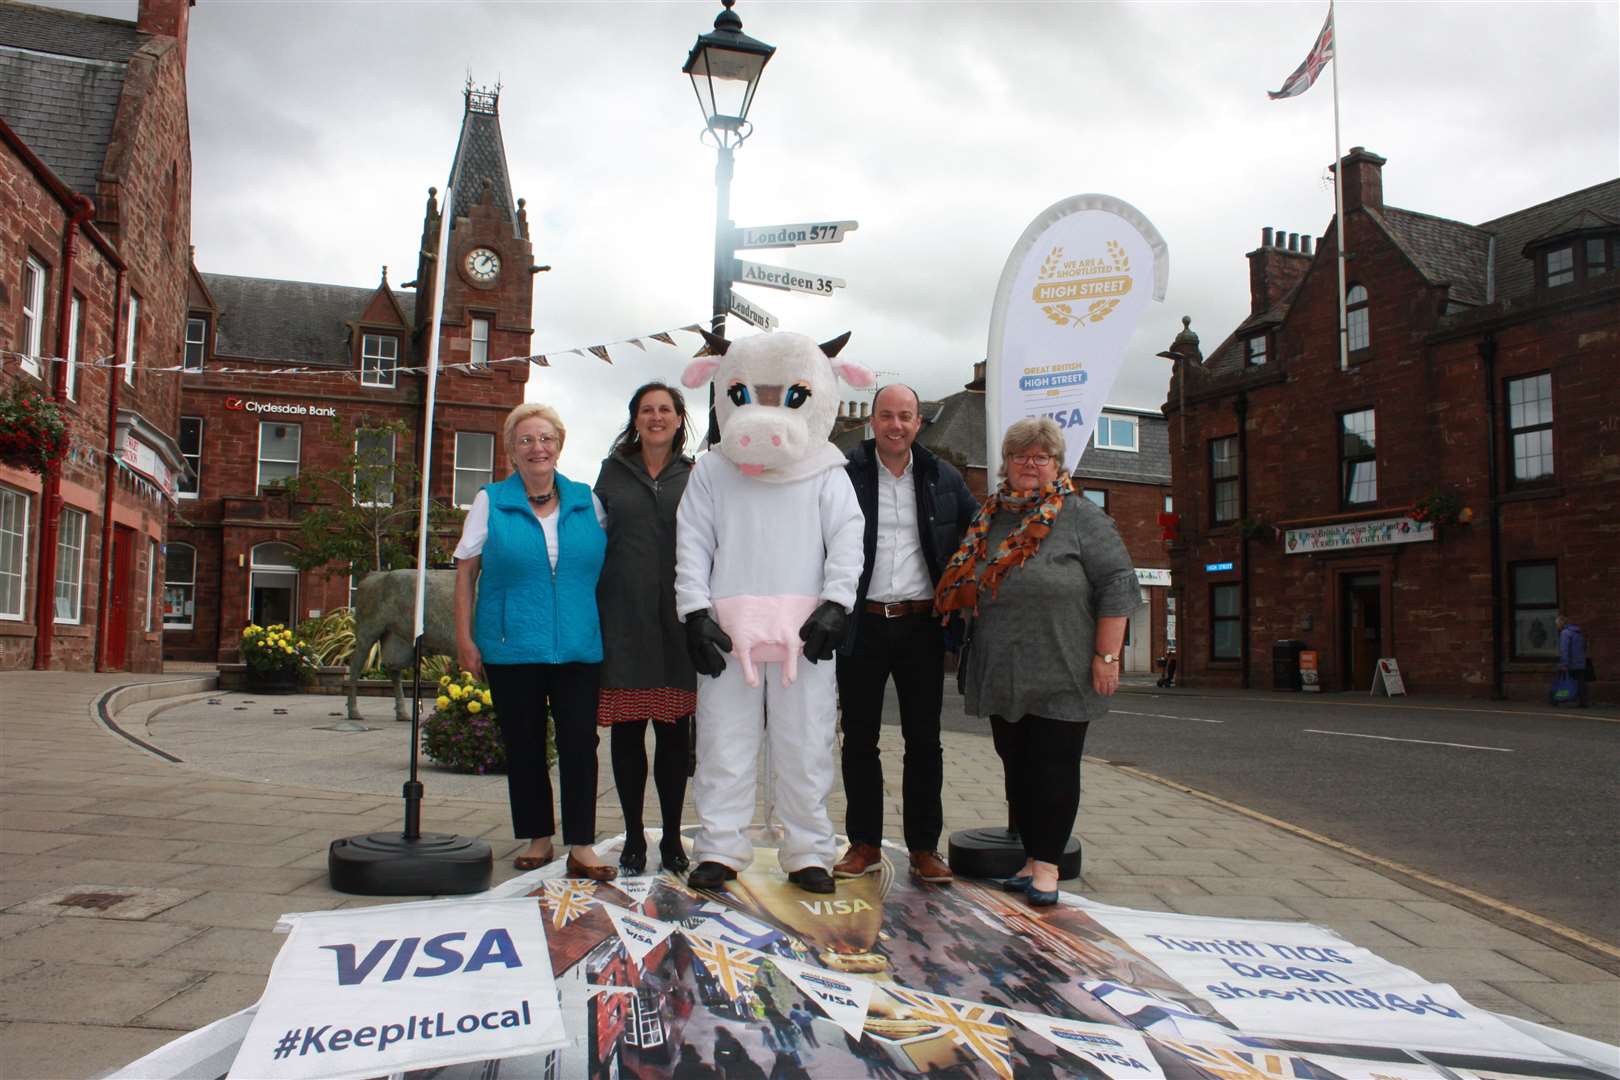 Turriff Business Associations' Rose Logan (left) and Marj Chalmers (right) with Visa judges Derek Band and Amy Gura. Pic: Grant Milne